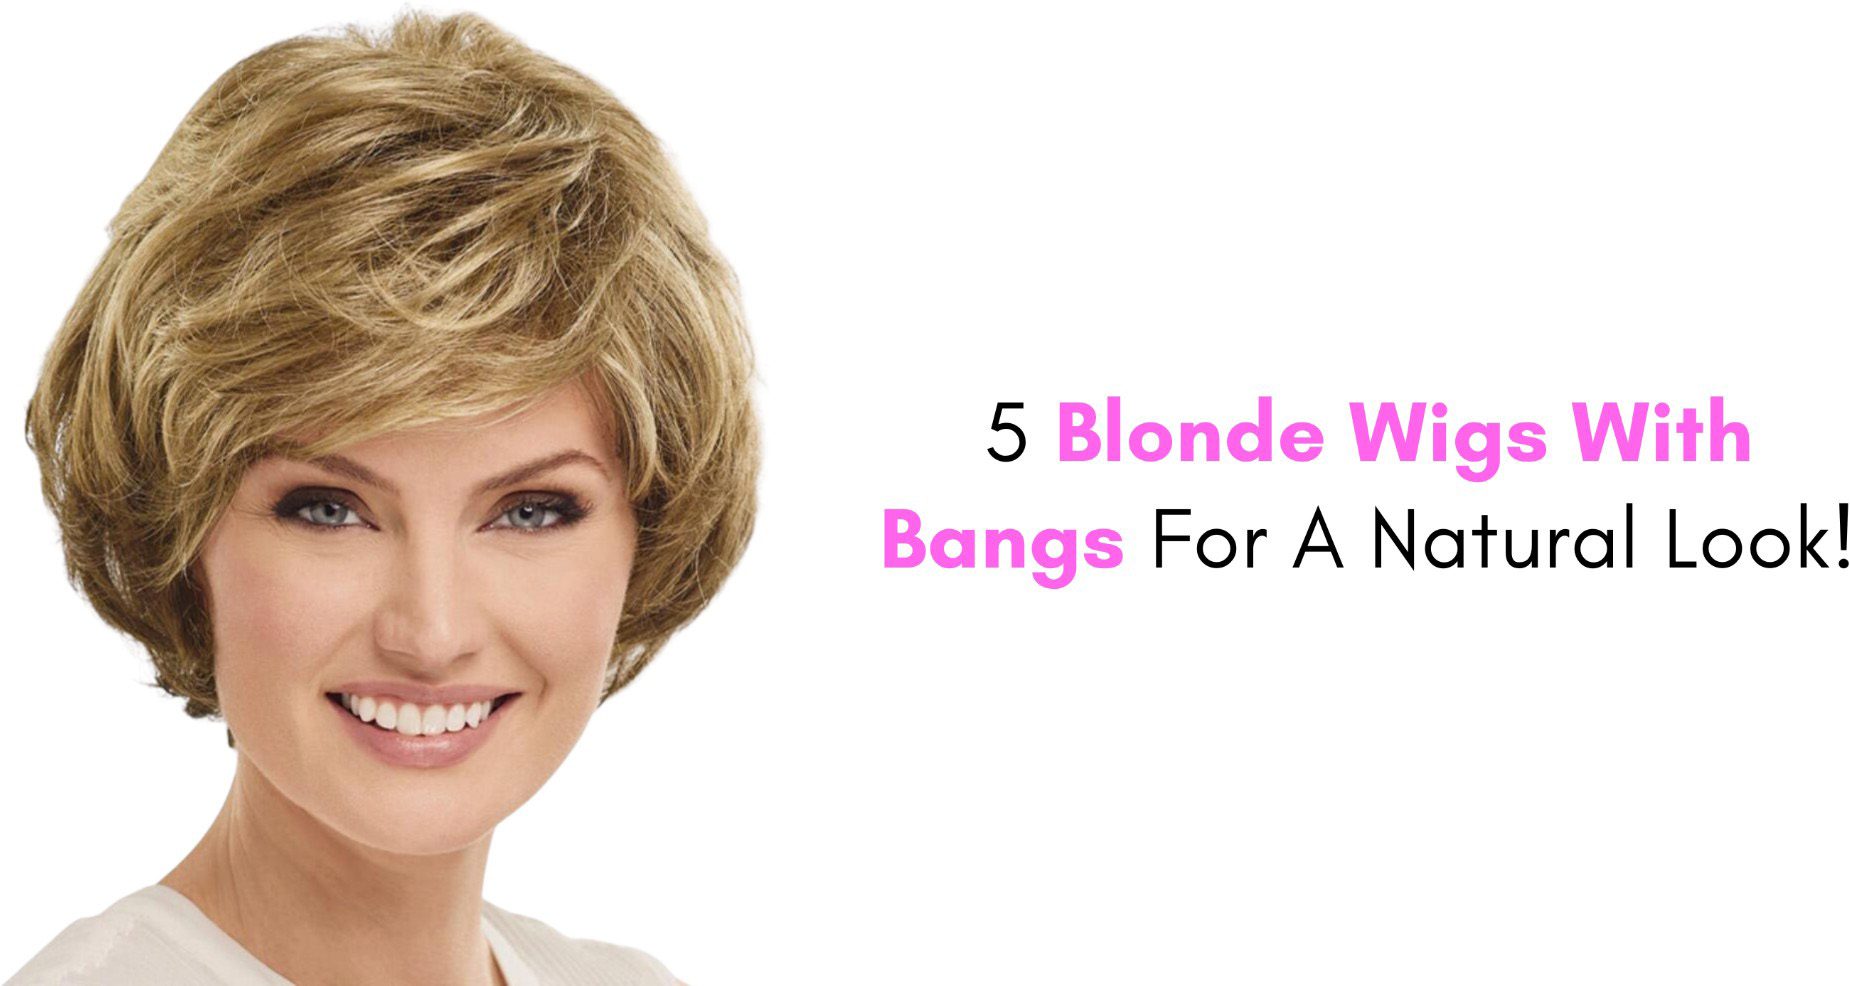 5 Blonde Wigs With Bangs For A Natural Look!